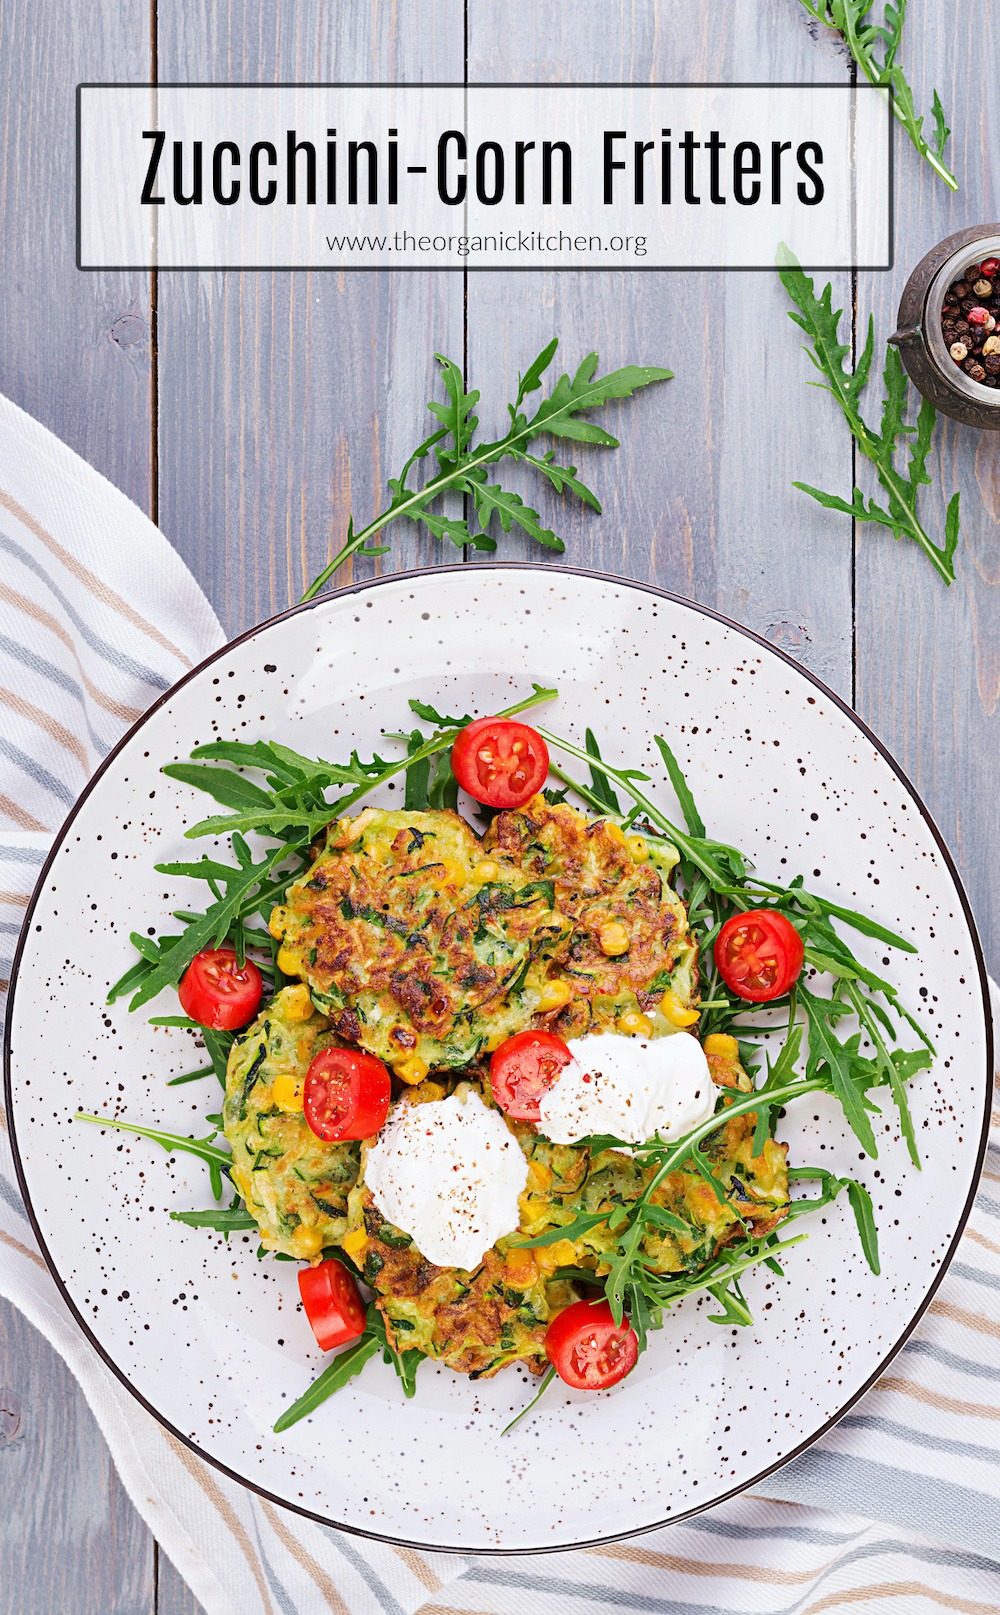 Six Zucchini-Corn Fritters on a black and white speckled plate set on a striped dish towel. 